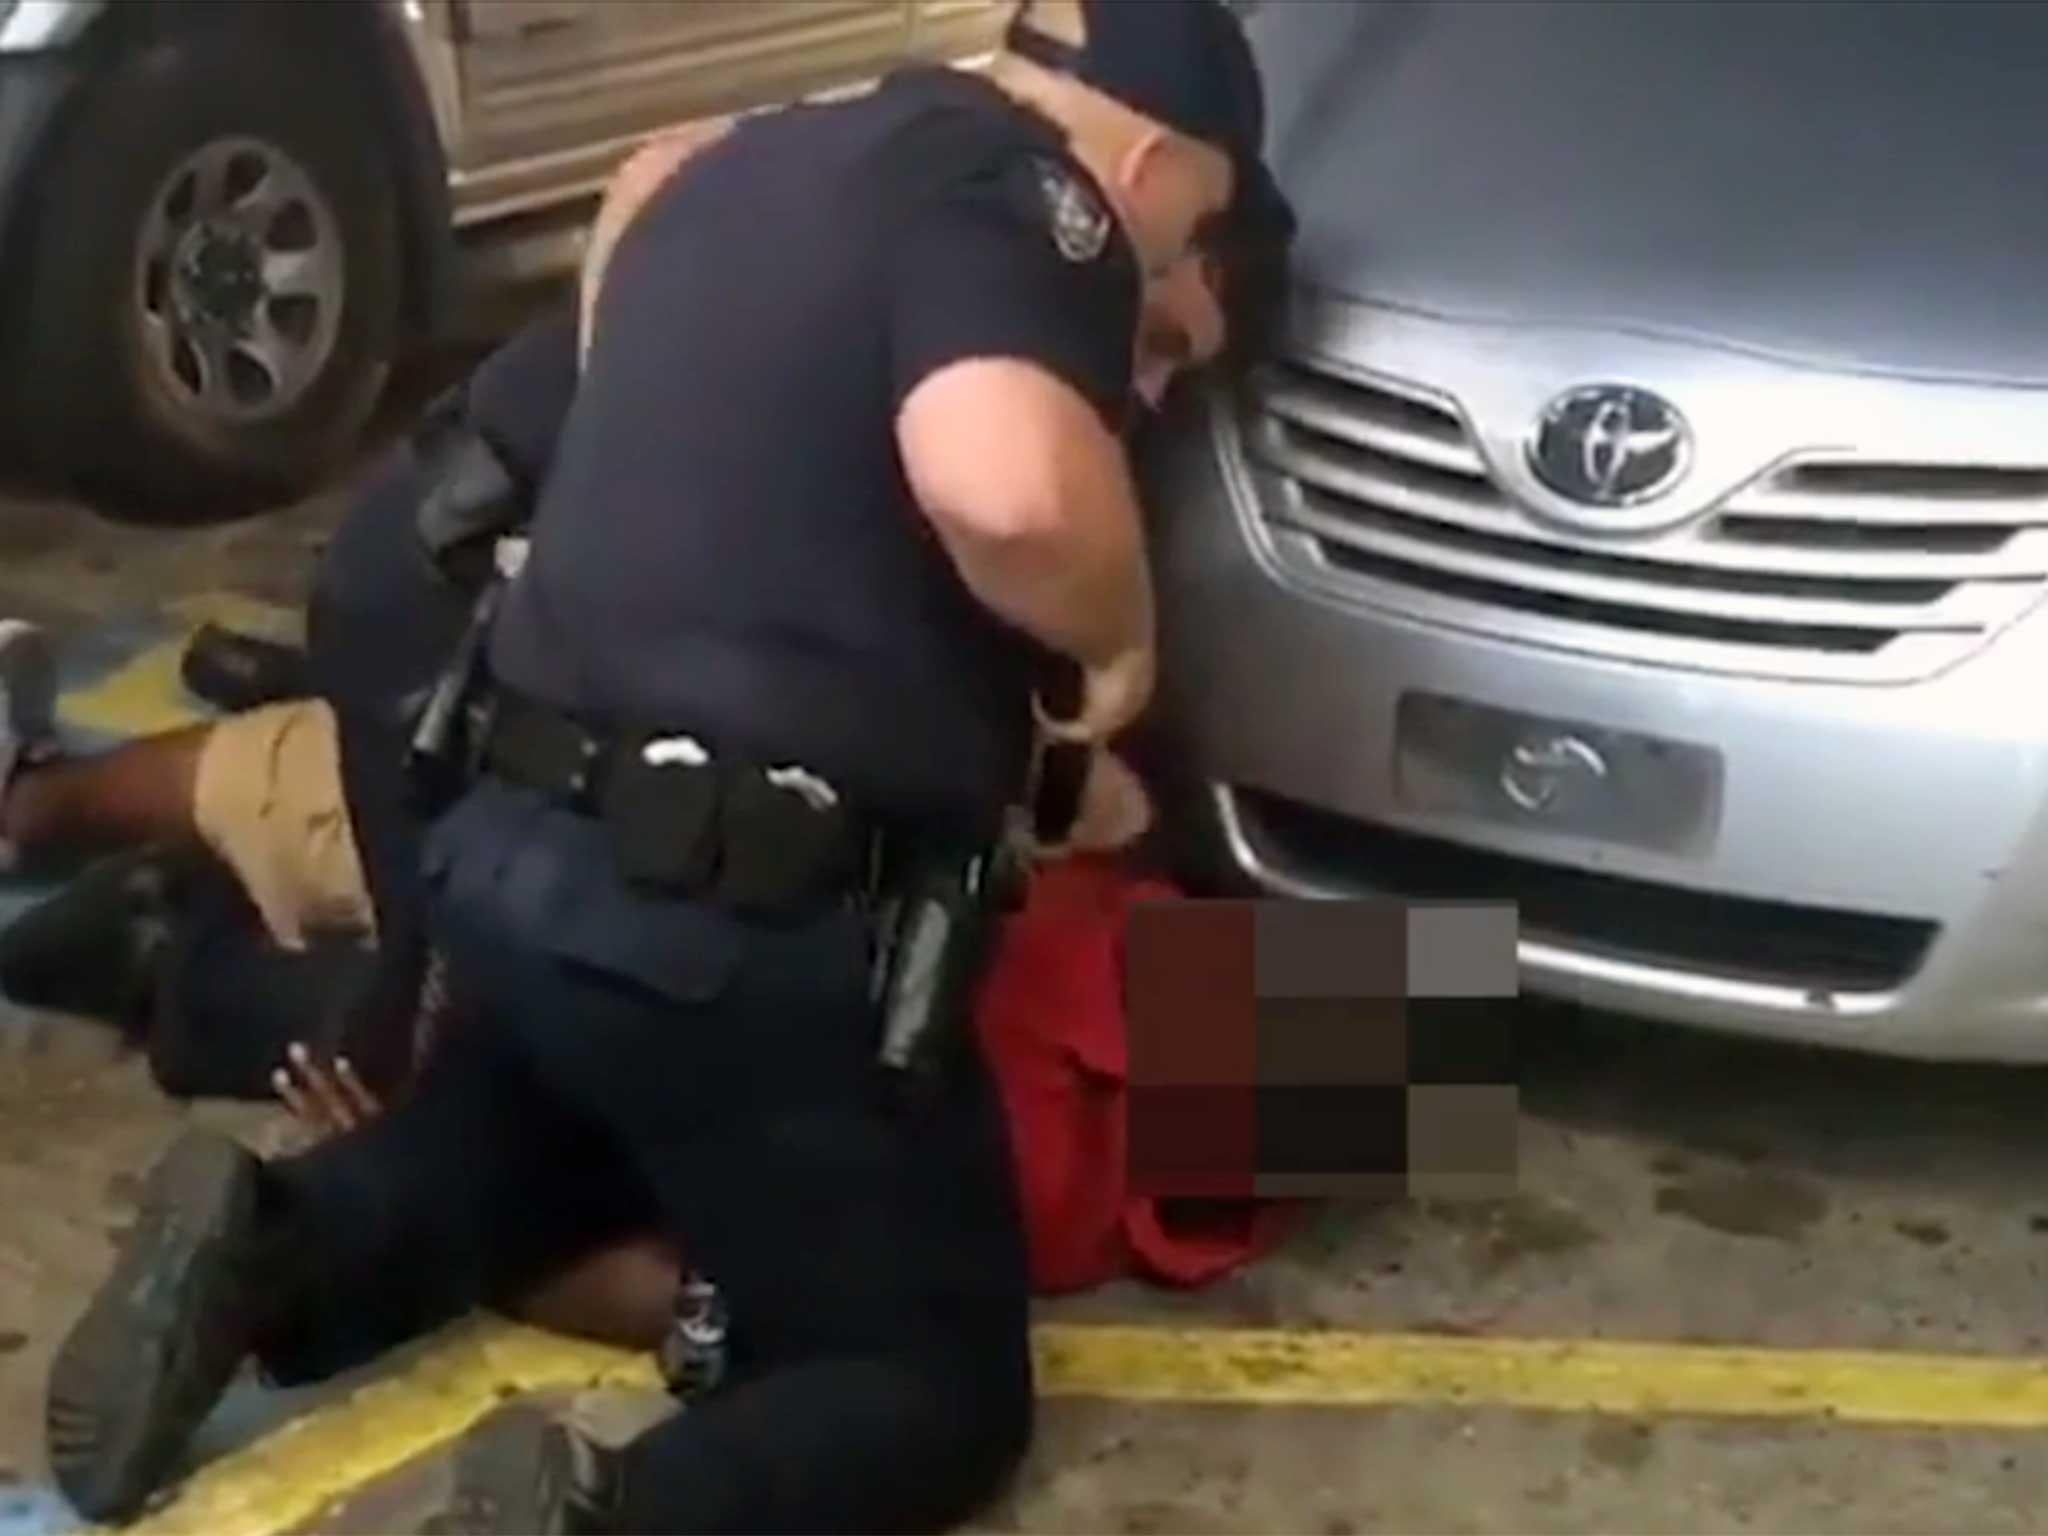 Alton Sterling was defenceless on the ground when the white officer pulled out his gun